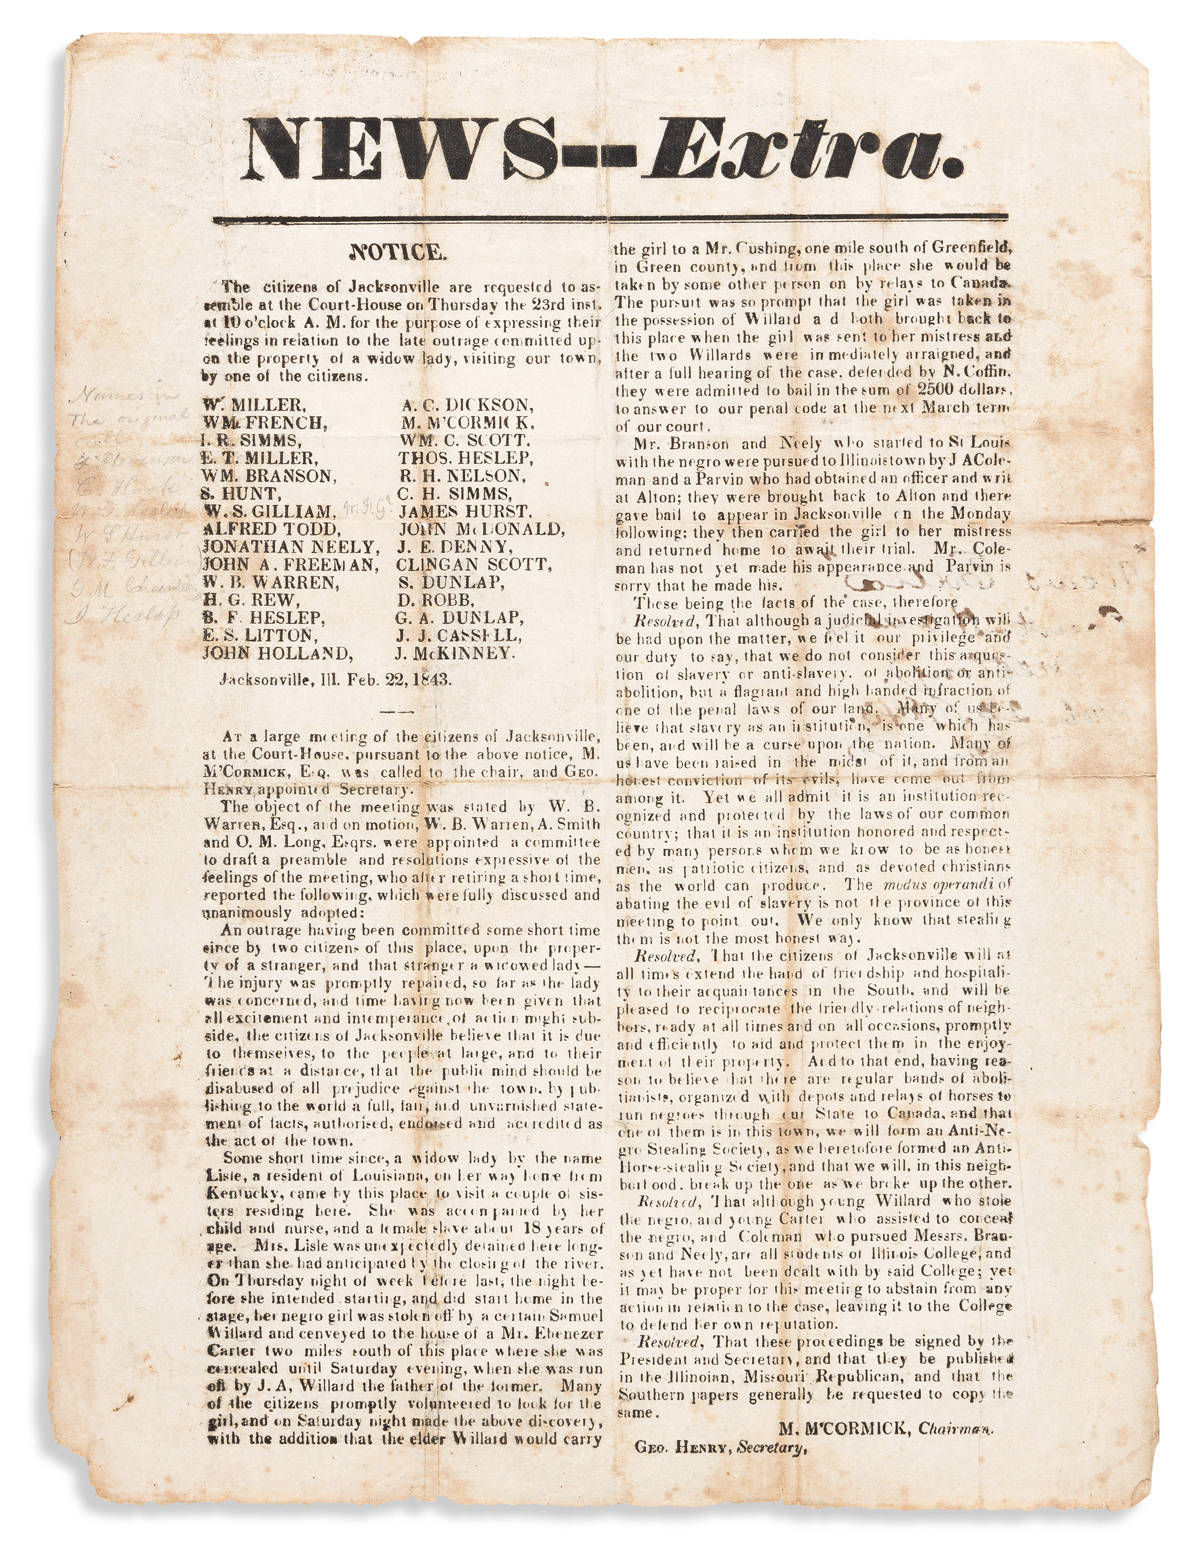 (SLAVERY AND ABOLITION.) Broadside announcing the formation of an Anti-Negro Stealing Society to fight the Underground Railroad.